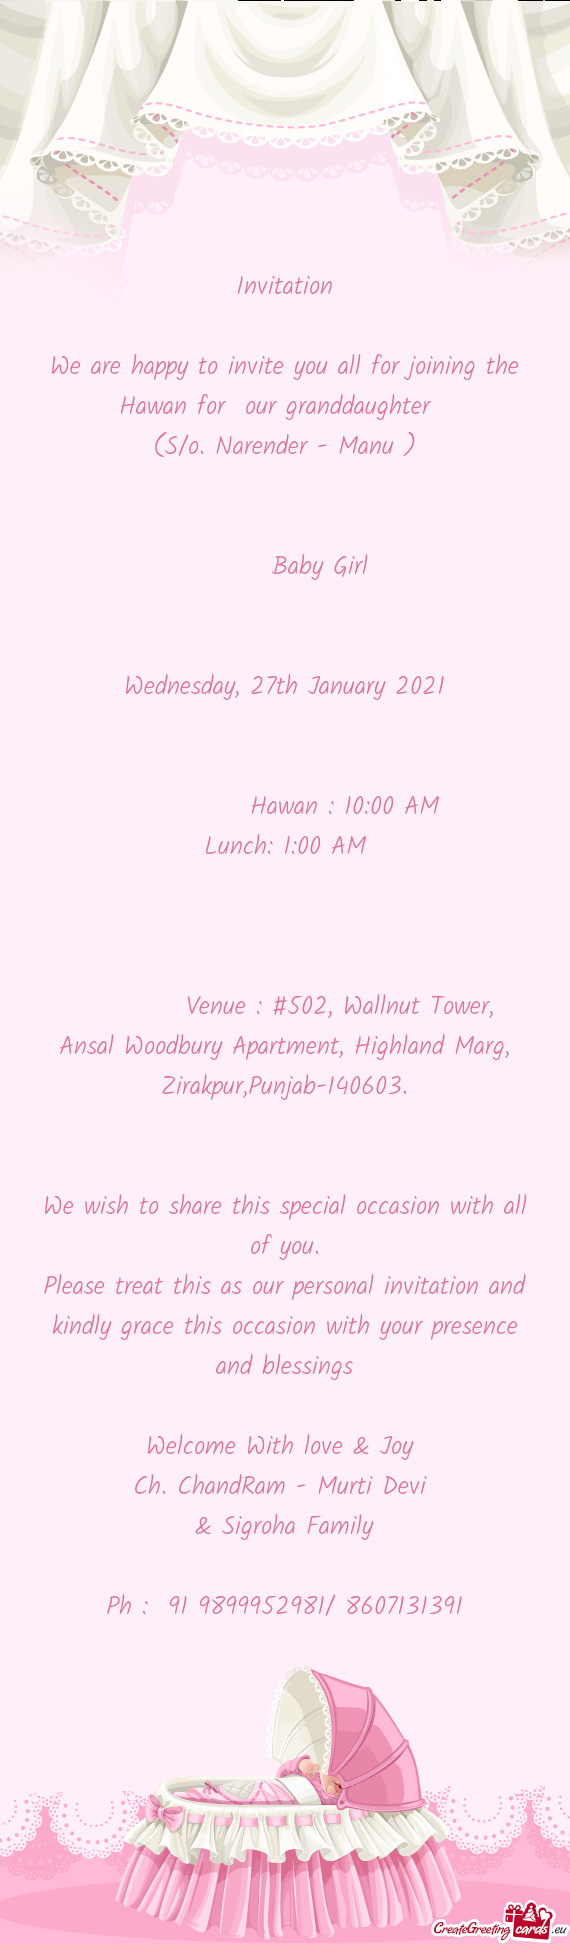 We are happy to invite you all for joining the Hawan for our granddaughter